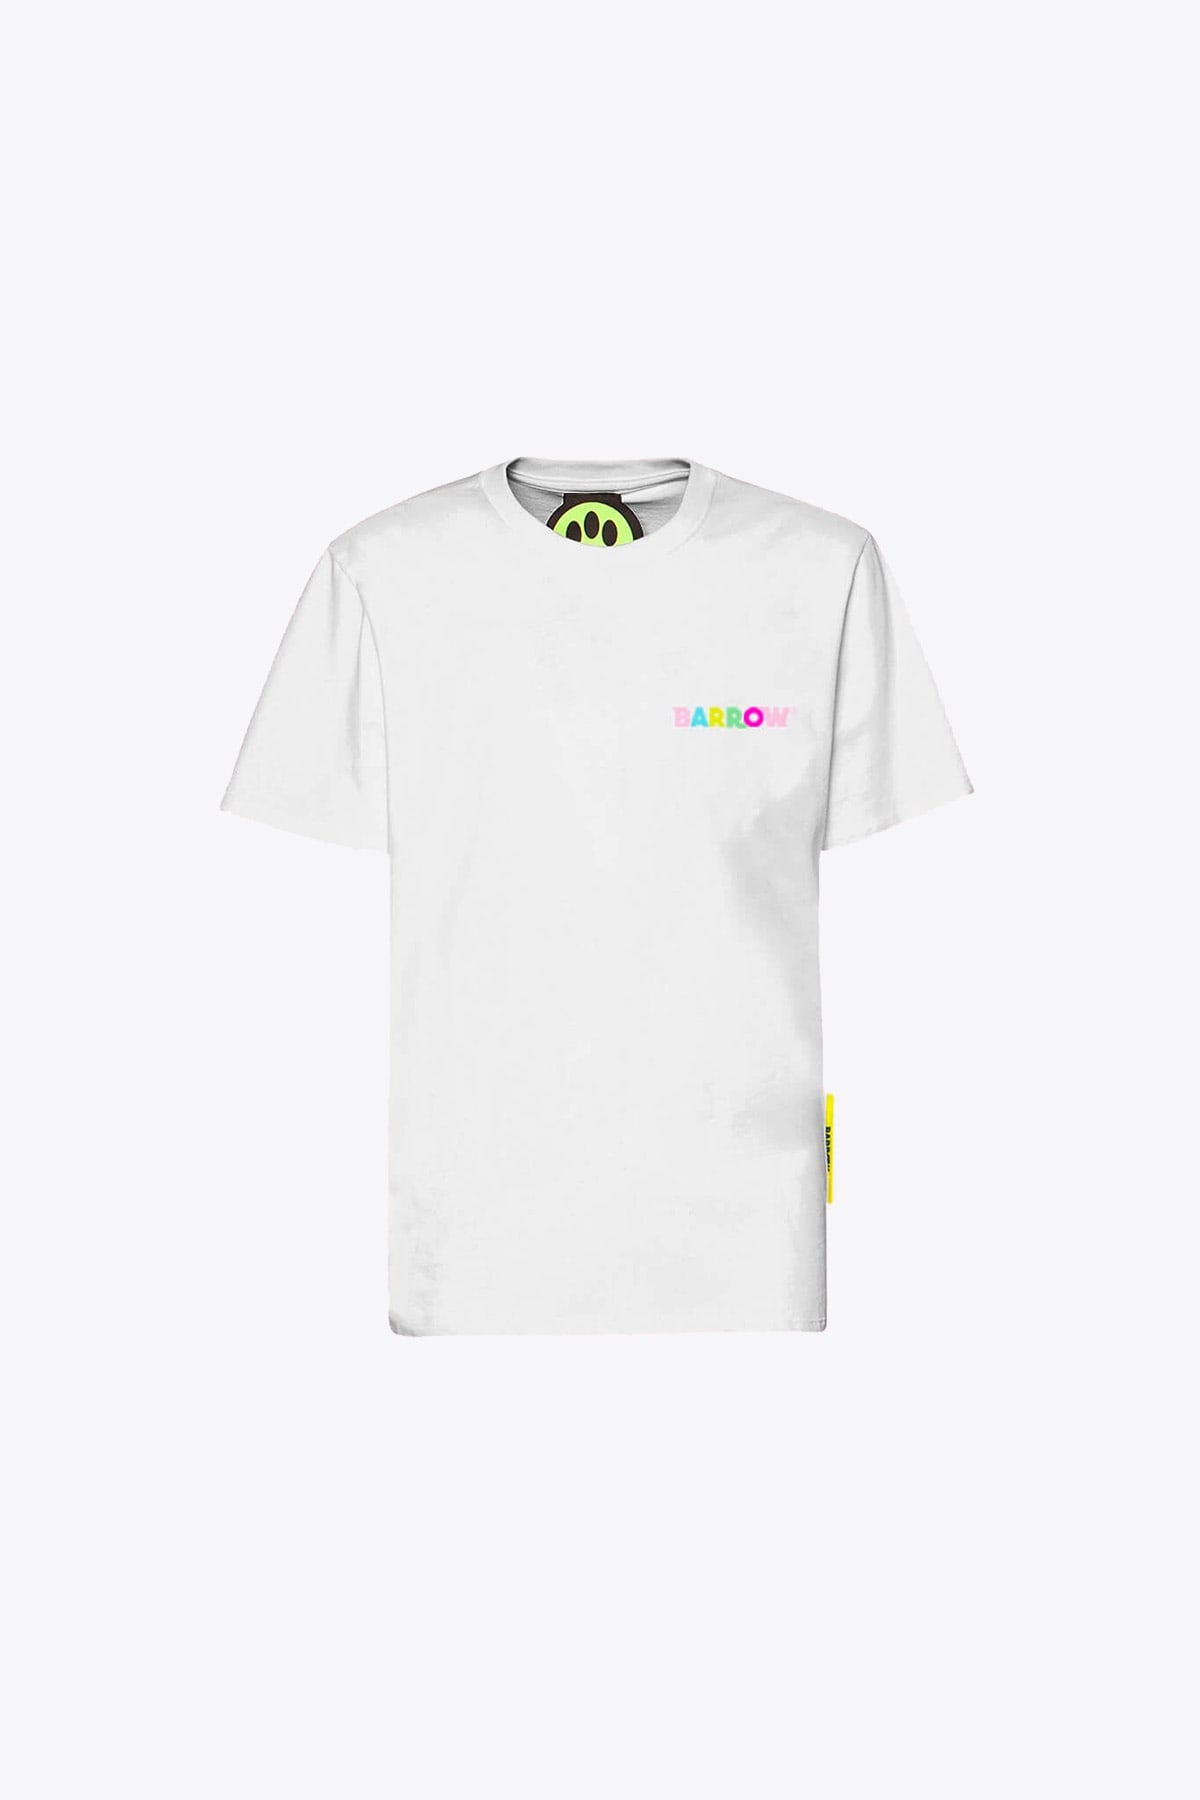 Barrow T-shirt Jersey Unisex White cotton t-shirt with multicolor logo